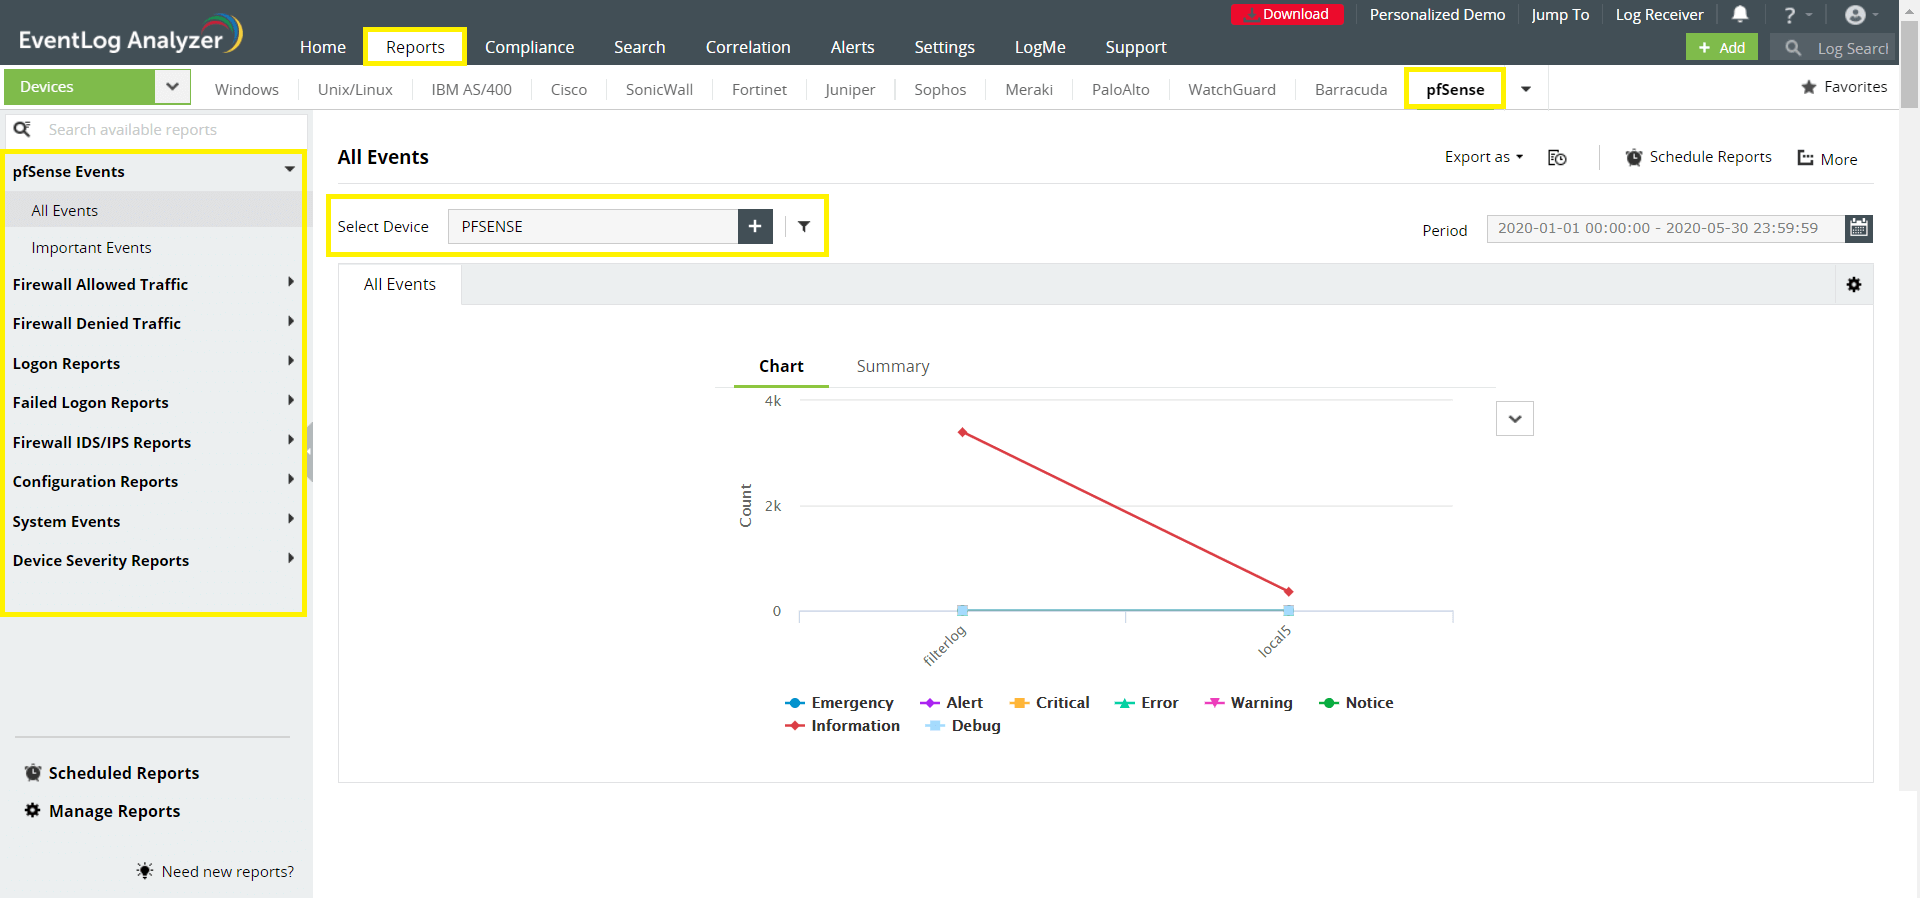 https://www.manageengine.com/products/eventlog/help/images/reports-for-pfSense-devices-01.png